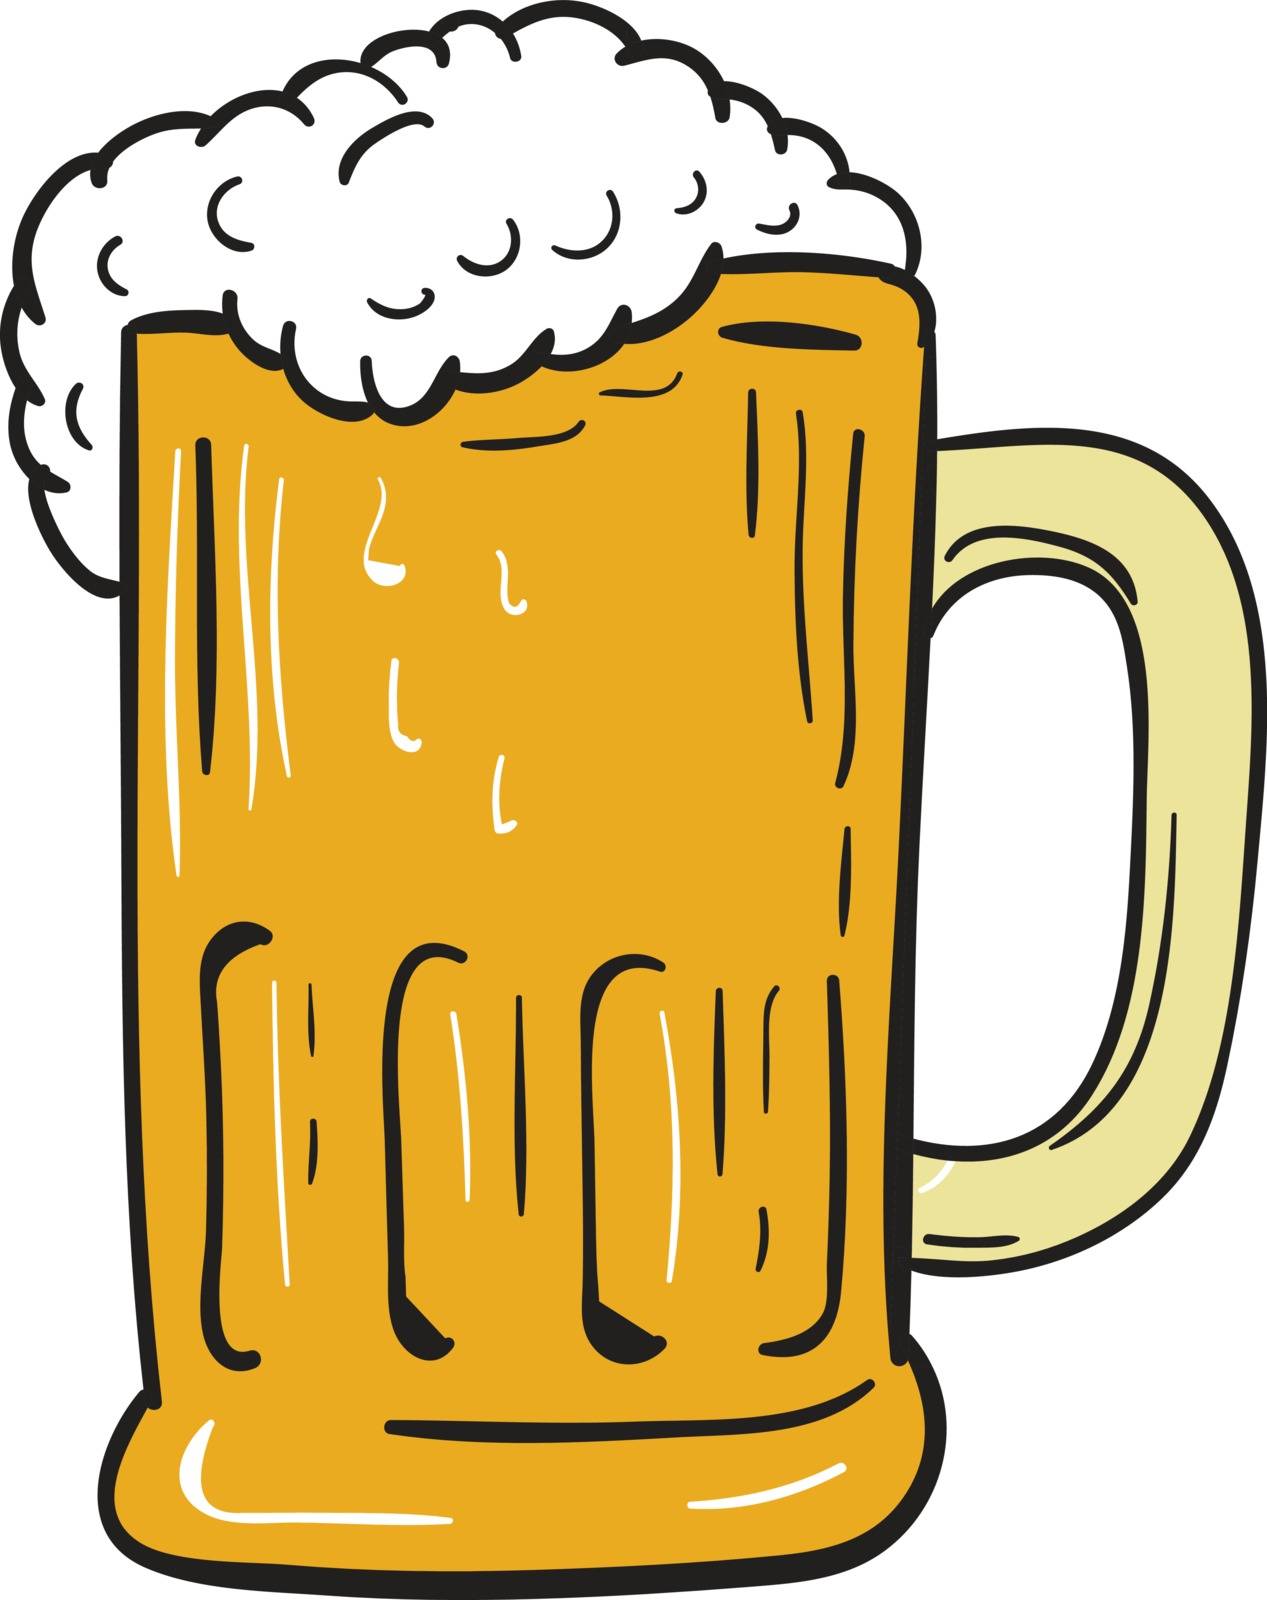 Drawing sketch style illustration of a beer mug with beer froth set on isolated white background. 